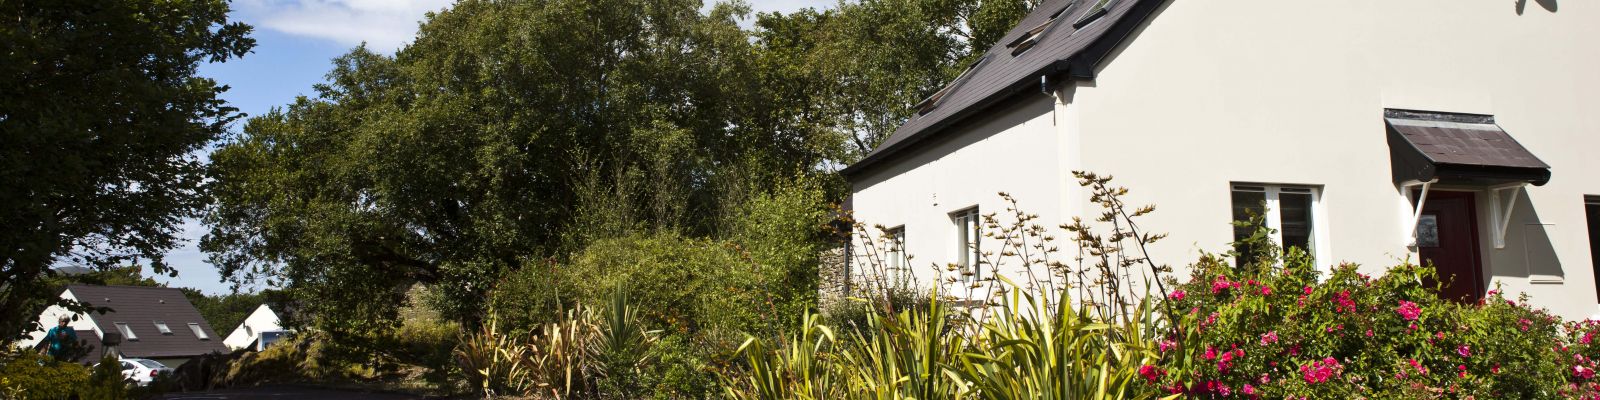 4 Star Self-Catering Accommodation West Cork